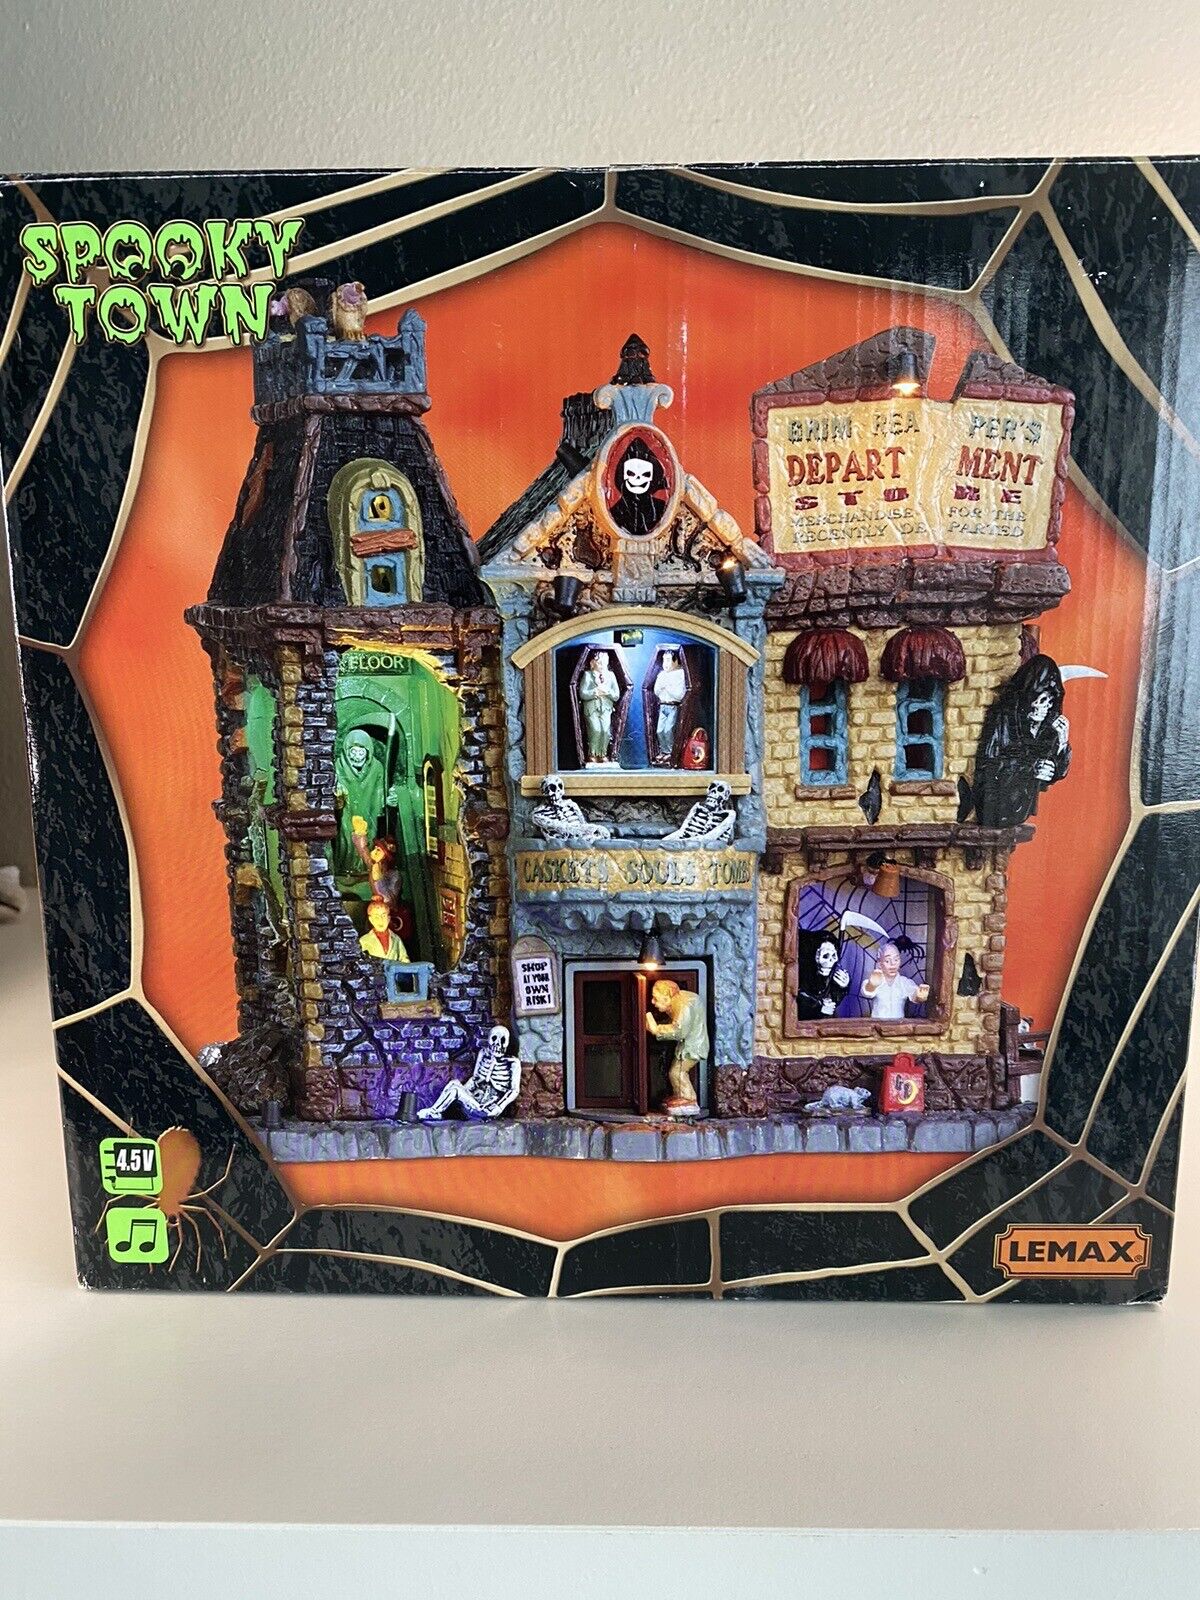 Lemax Spooky Town Grim Reaper’s Department Store Halloween Table Top #35492 New